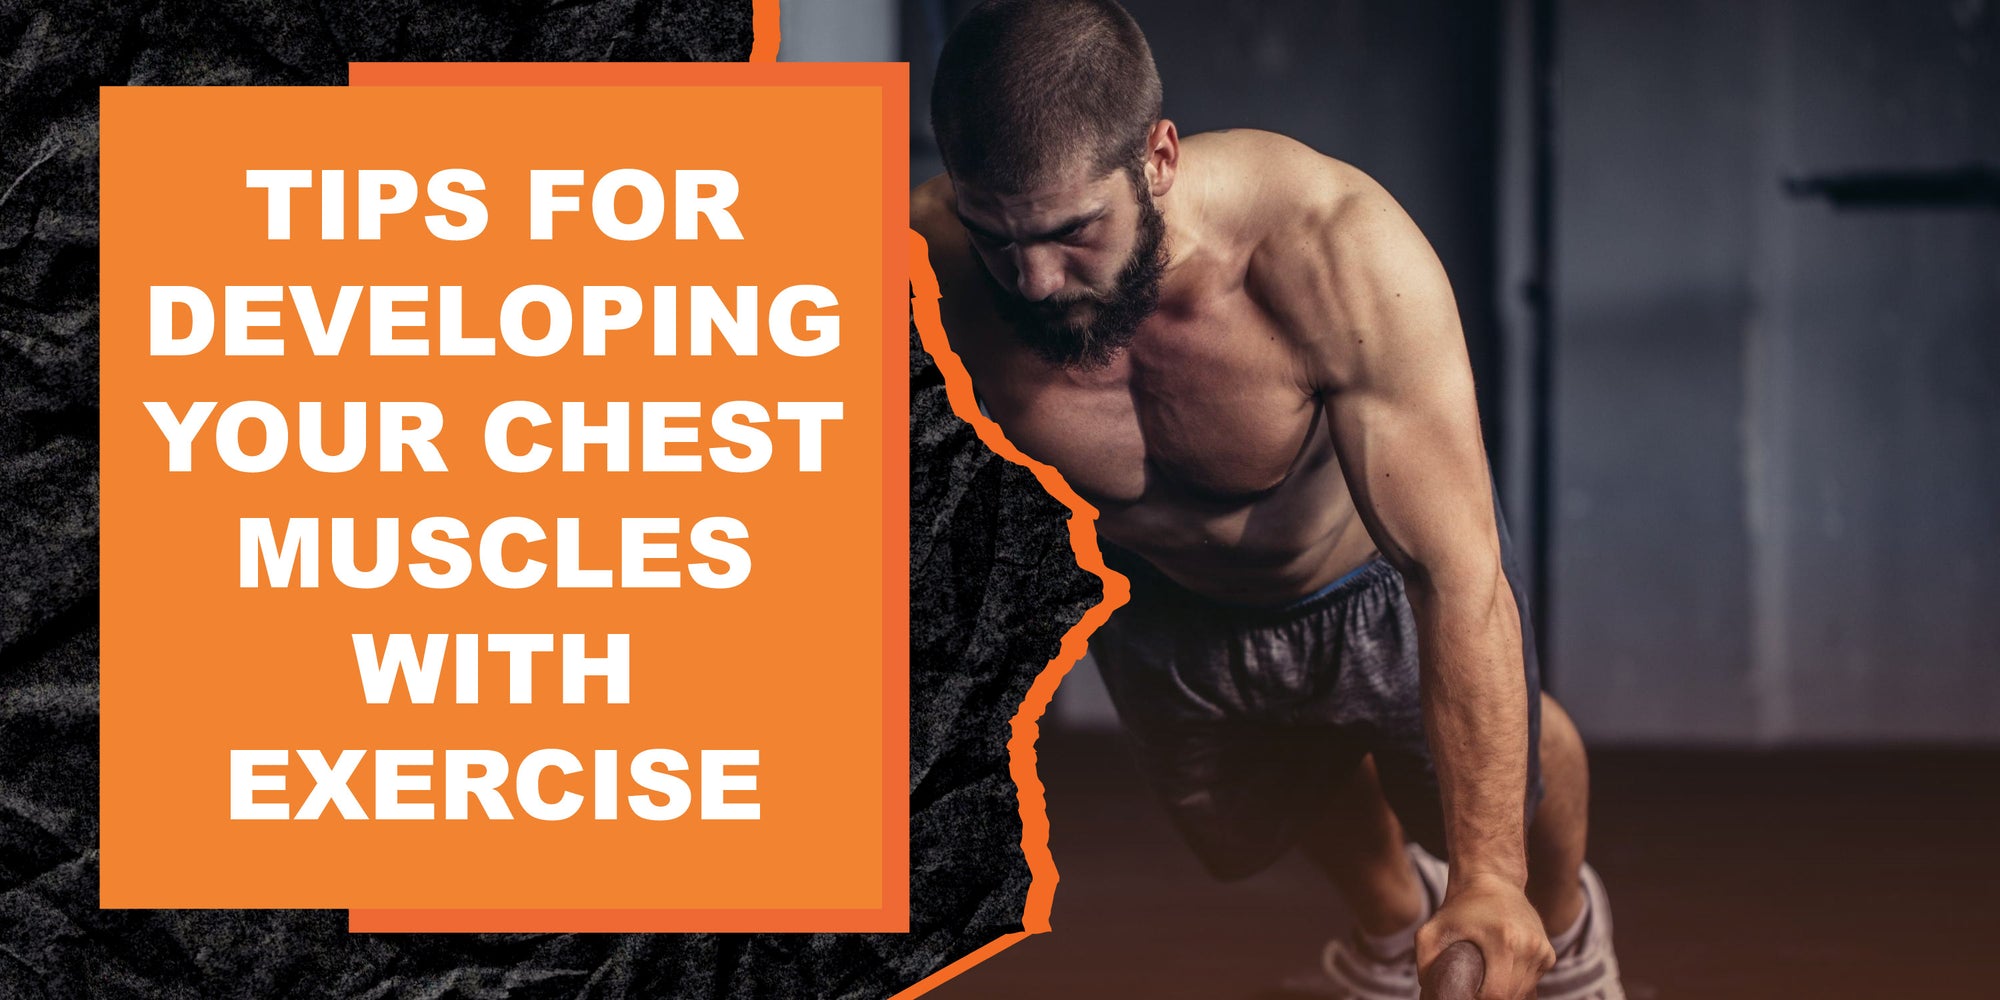 Tips for Developing Your Chest Muscles with Exercise